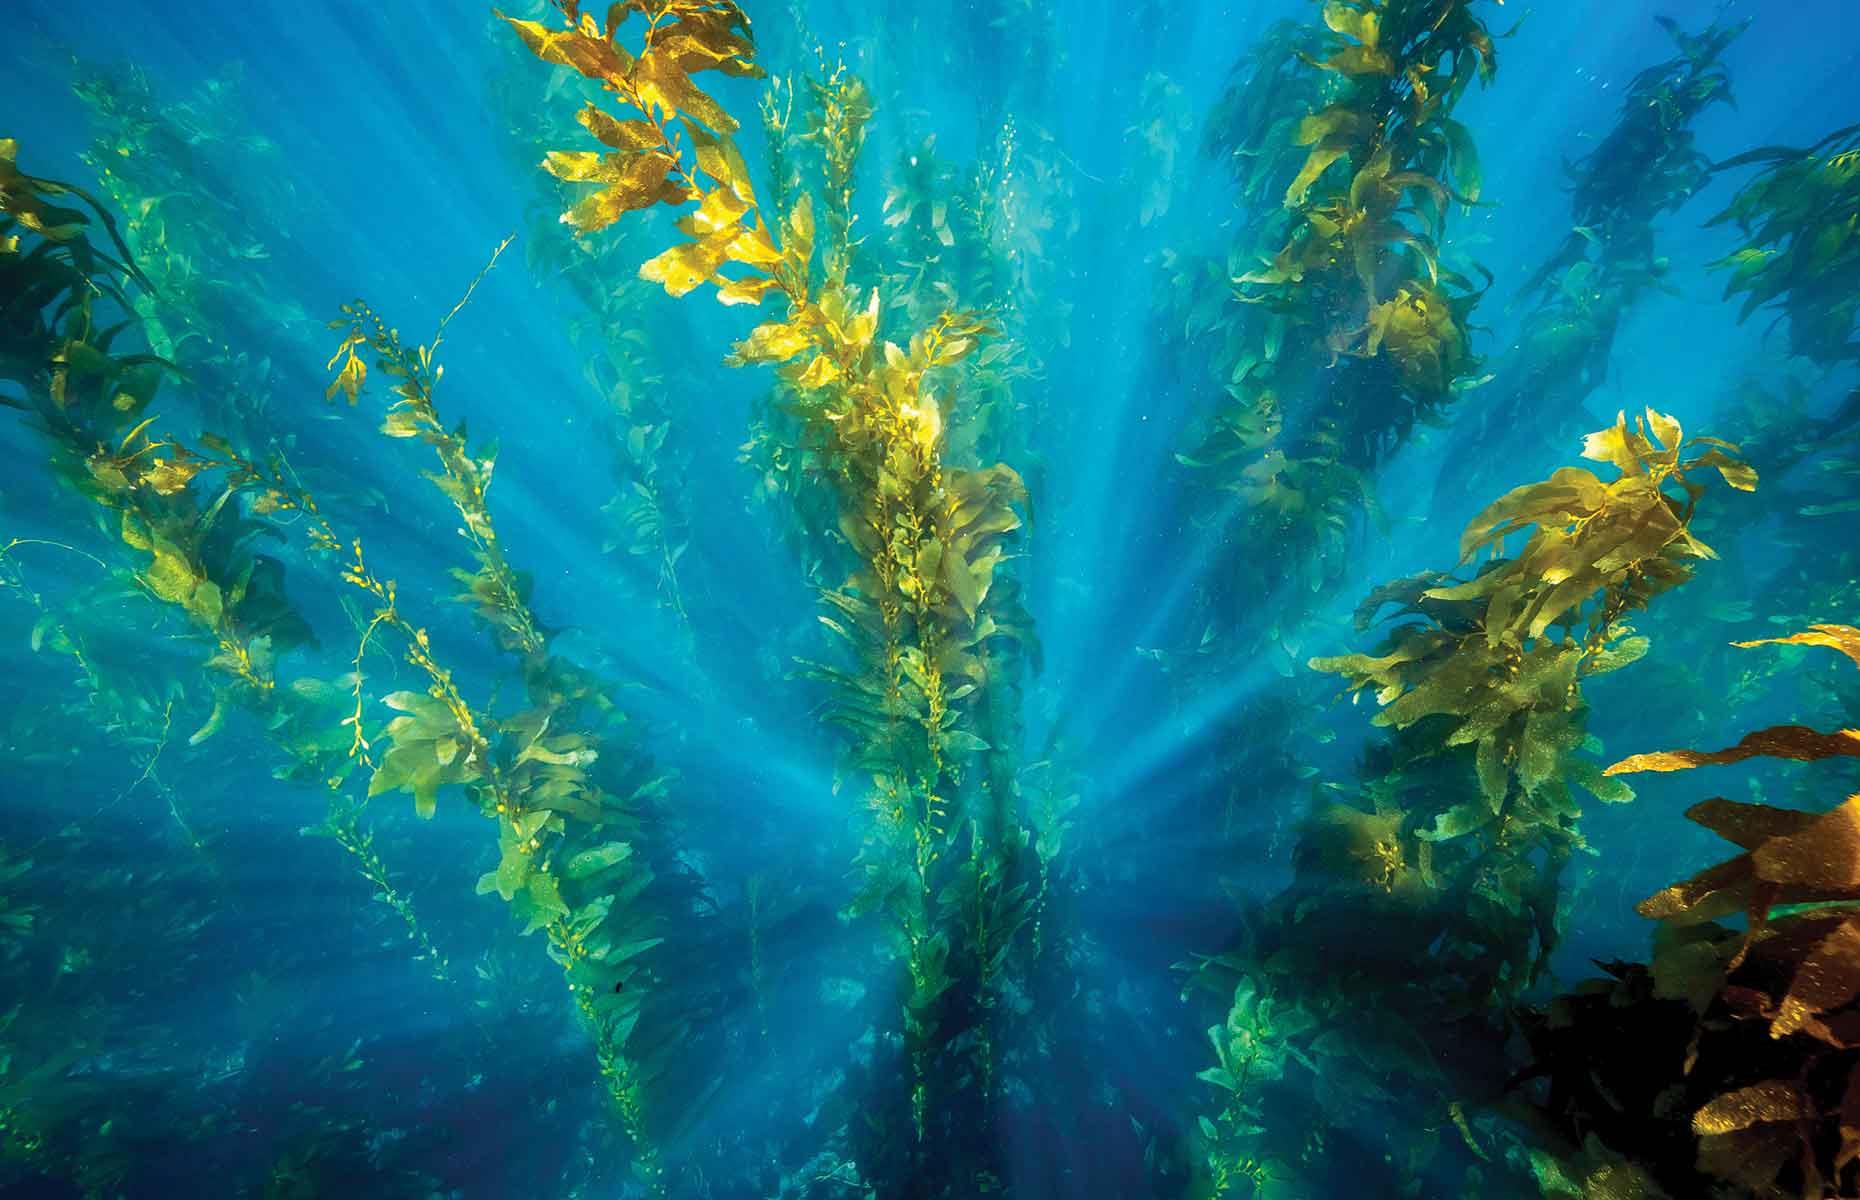 <p>Termed by some scientists ‘the sequoias of the seas’, kelp absorbs carbon dioxide – reducing the acidification of the oceans – and releases oxygen into the water. </p>  <p><a href="https://www.loveexploring.com/news/135874/peter-von-puttkamer-documentary-the-last-stand-ecoflix"><strong>Read our interview with filmmaker Peter von Puttkamer on the importance of old-growth forests</strong></a></p>